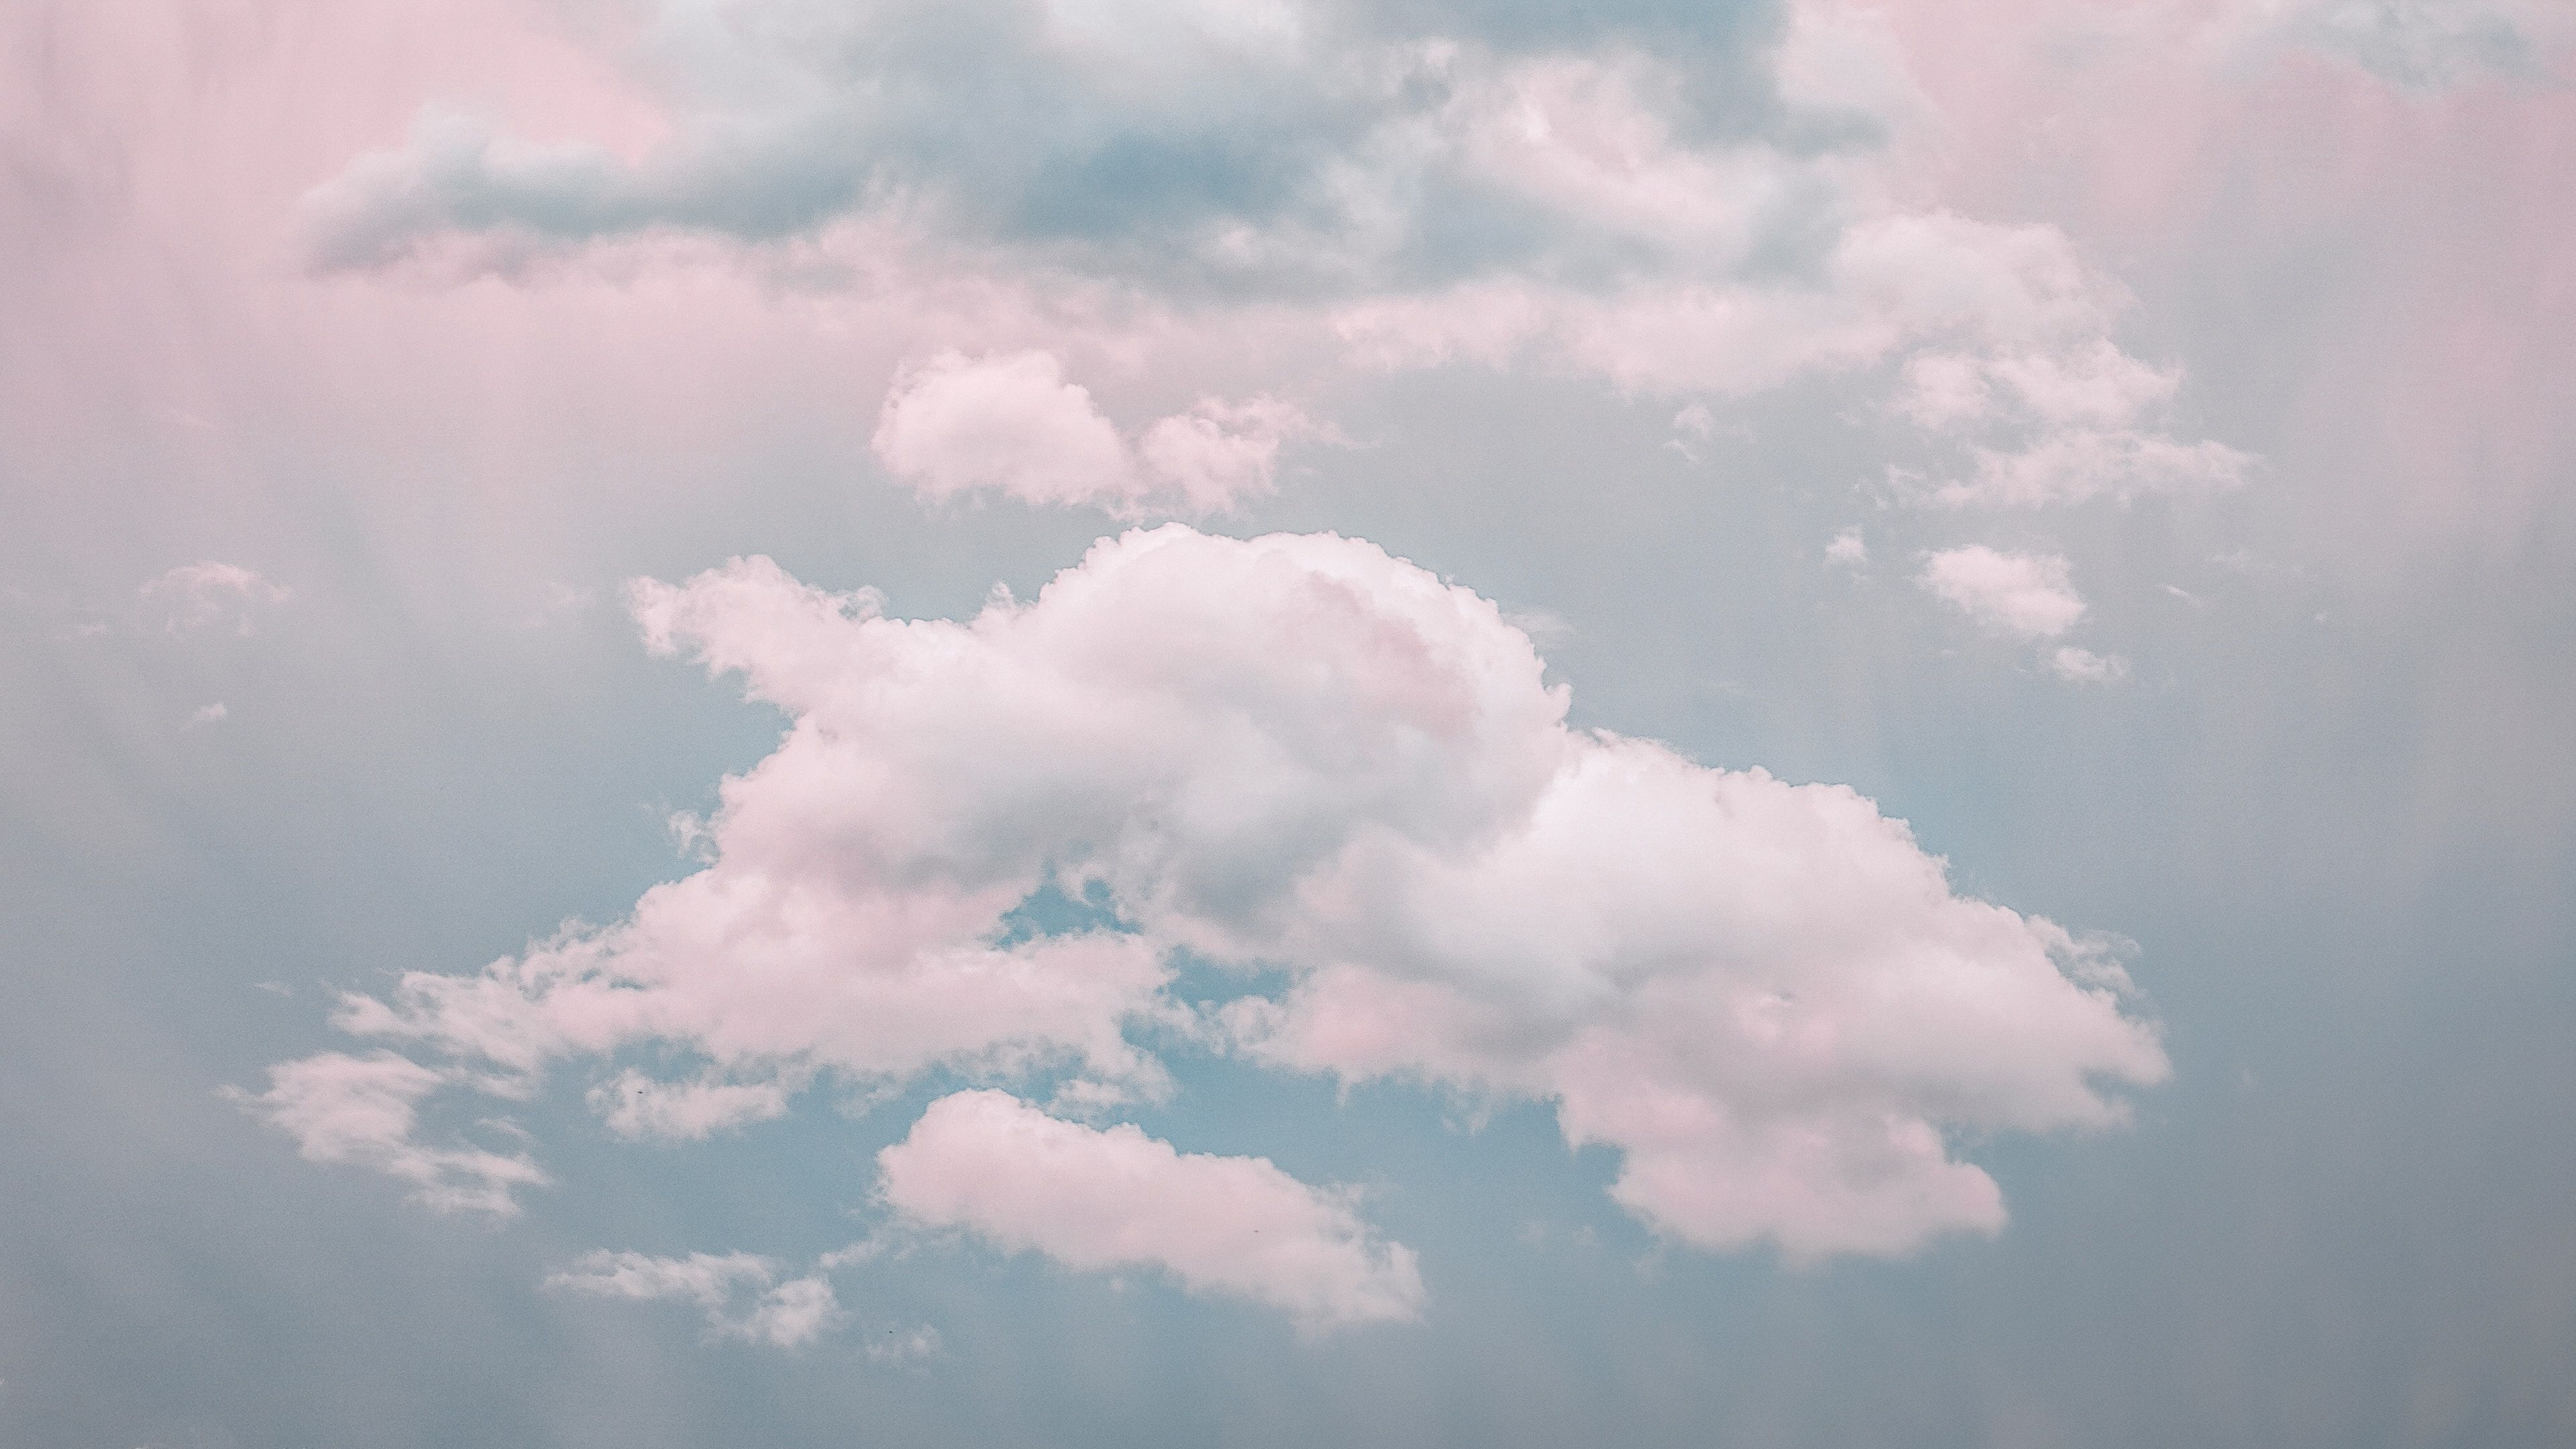 HD wallpaper clouds against the rainbow cirrus clouds sky cloudy pink   Wallpaper Flare